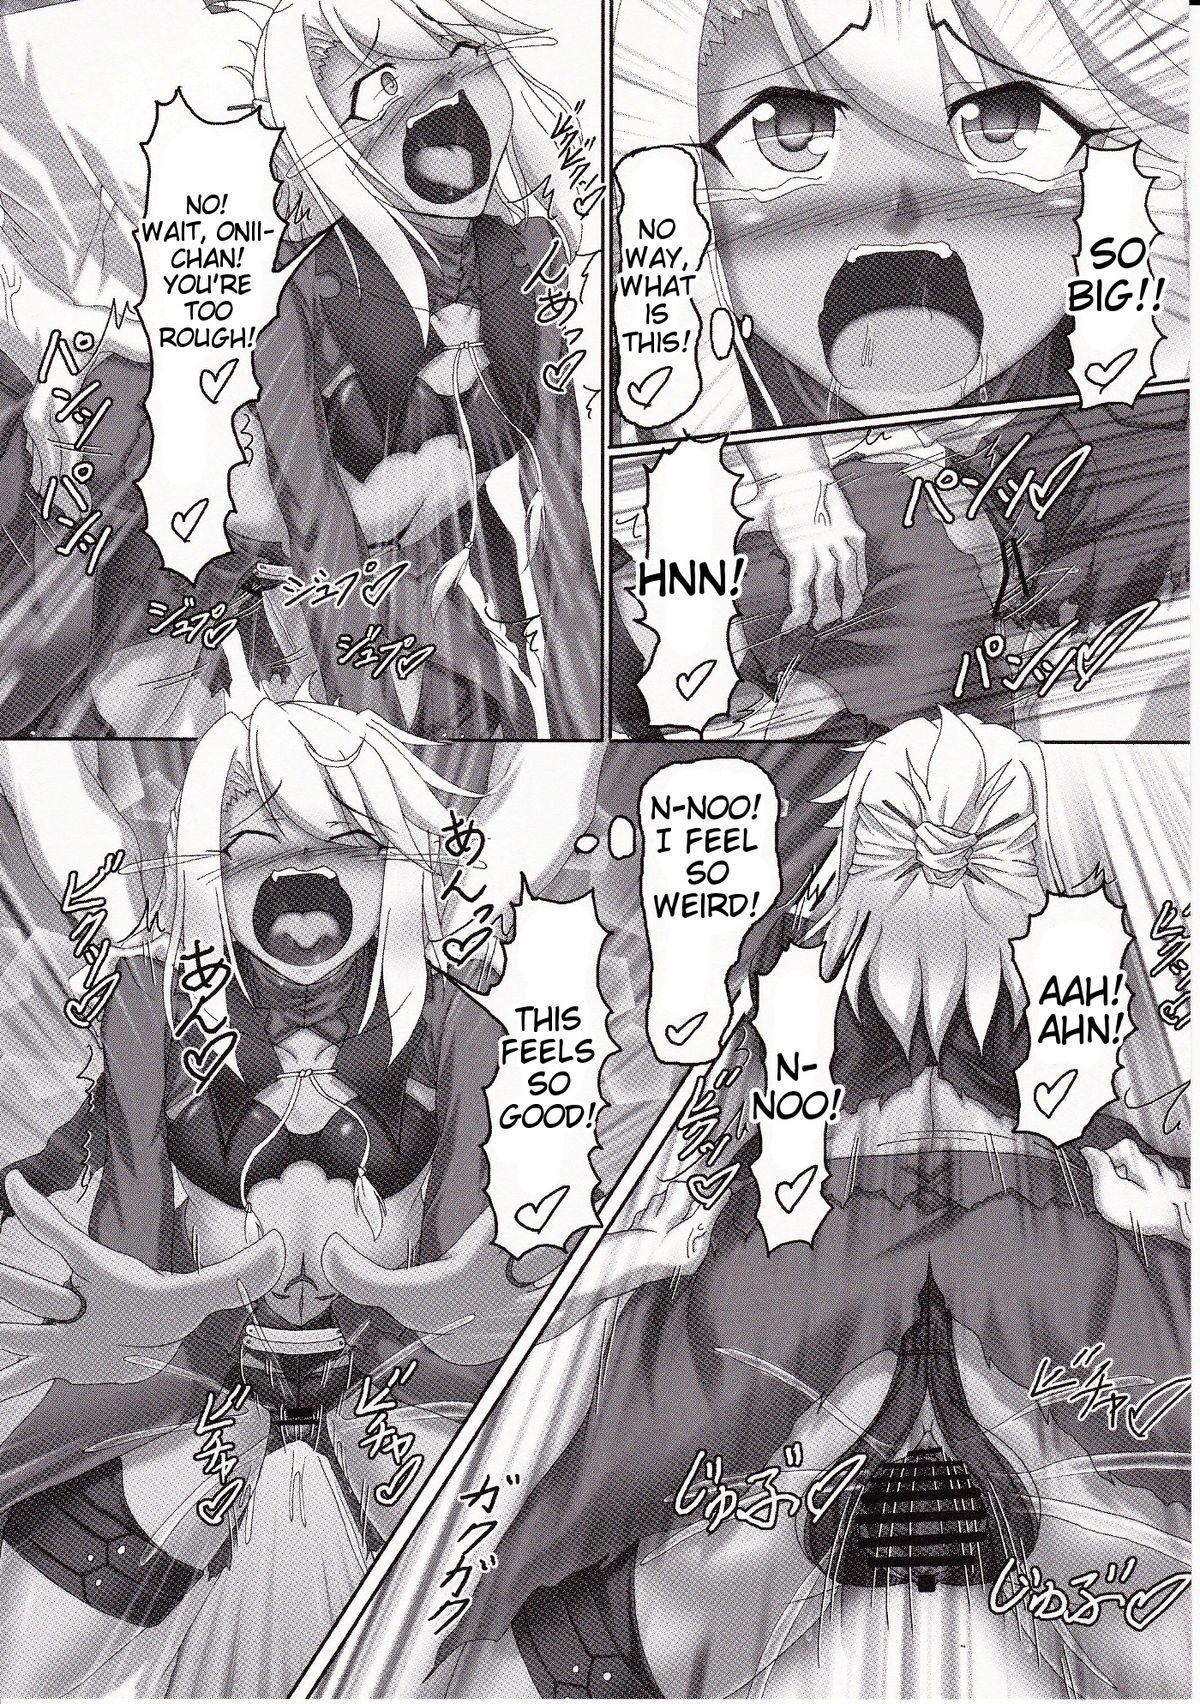 Couch Magical Ruby chan no Seigi wo Daite Dekishi shiro!! | Drowning in Magical Ruby-chan's Sexual Powers!! - Fate kaleid liner prisma illya Shoes - Page 9